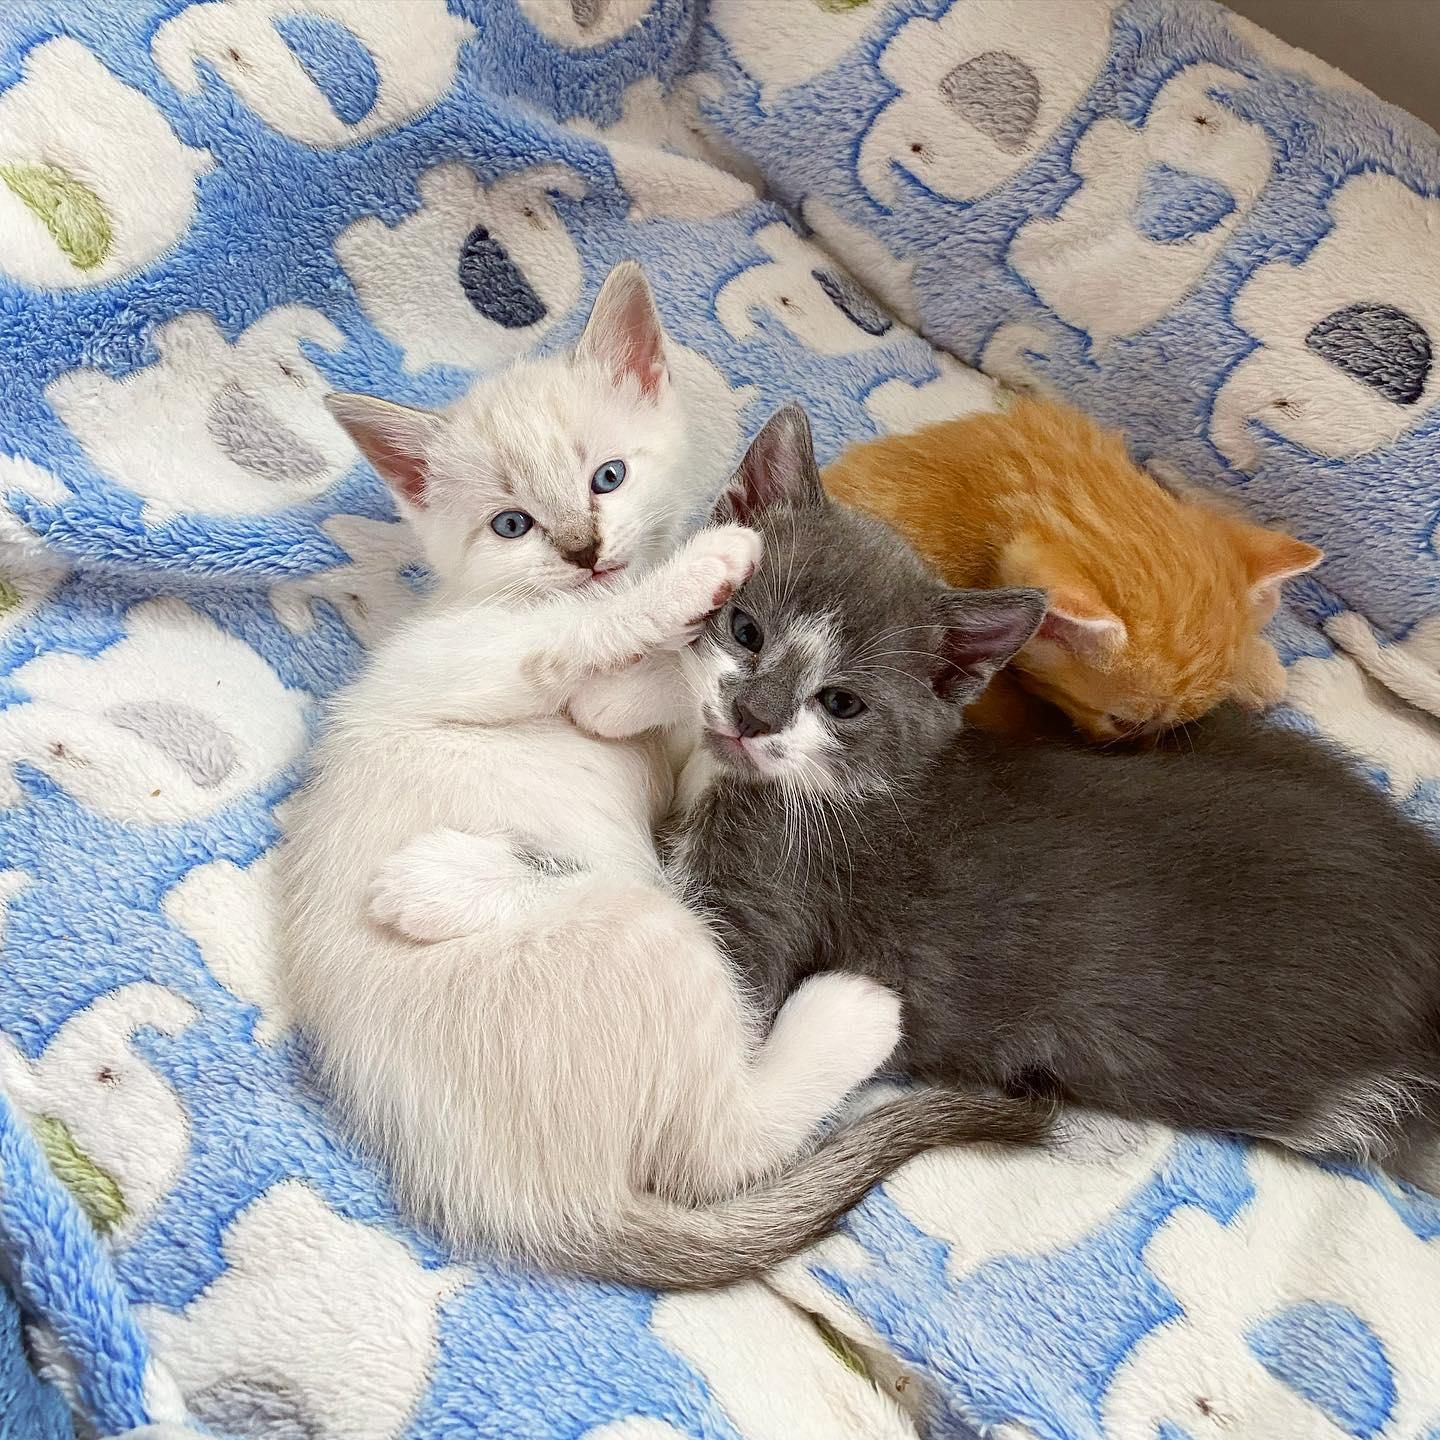 Weighing Newborn Kittens (and How This Could Save Their Lives) - TheCatSite